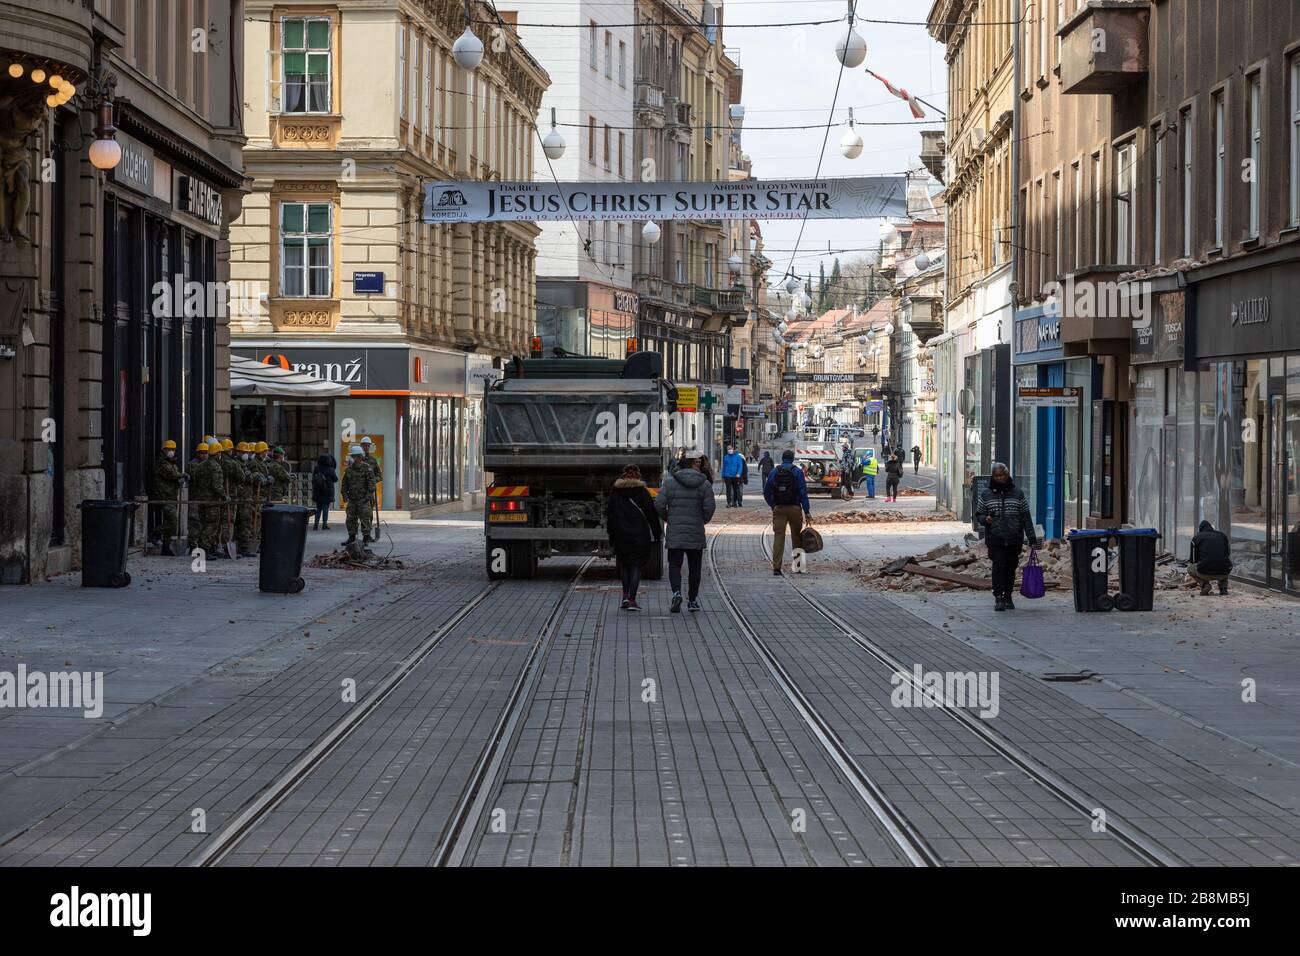 Earthquake in central Zagreb, Ilica street, Croatian army helping to clean up the town after the earthquake 22 Marth 2020. Stock Photo